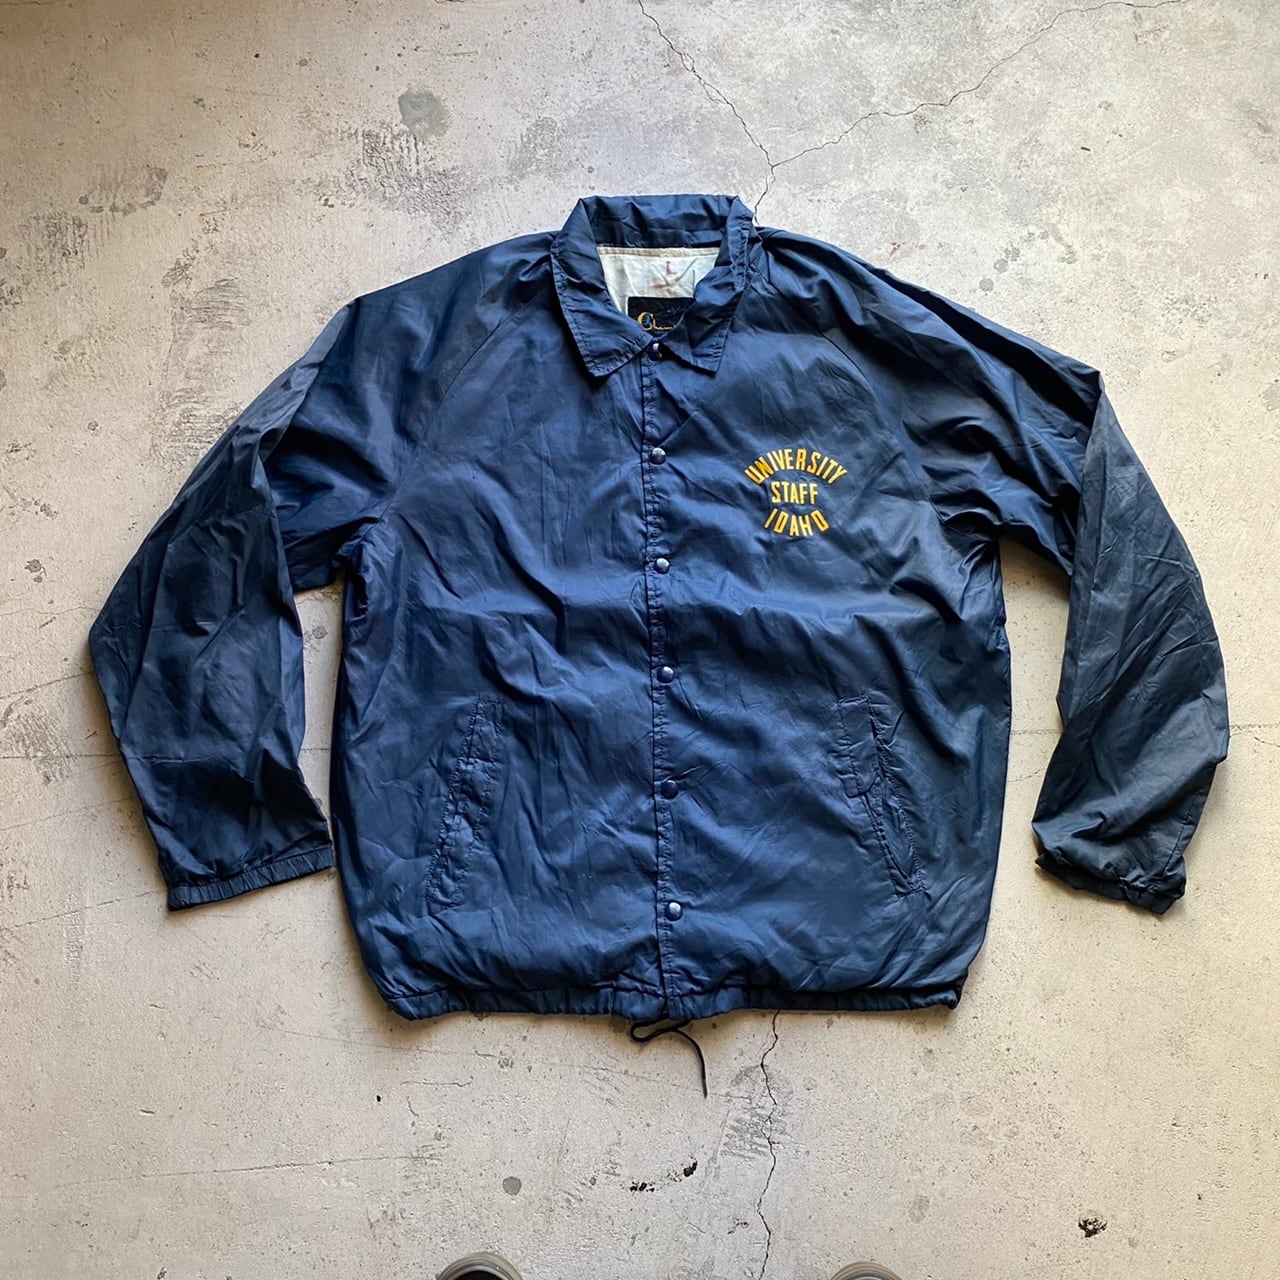 used vintage 60〜70s ヴィンテージ 古着 　チャンピオン　champion コーチ ジャケット アメリカ古着 COACH  JACKET | magazines webshop powered by BASE